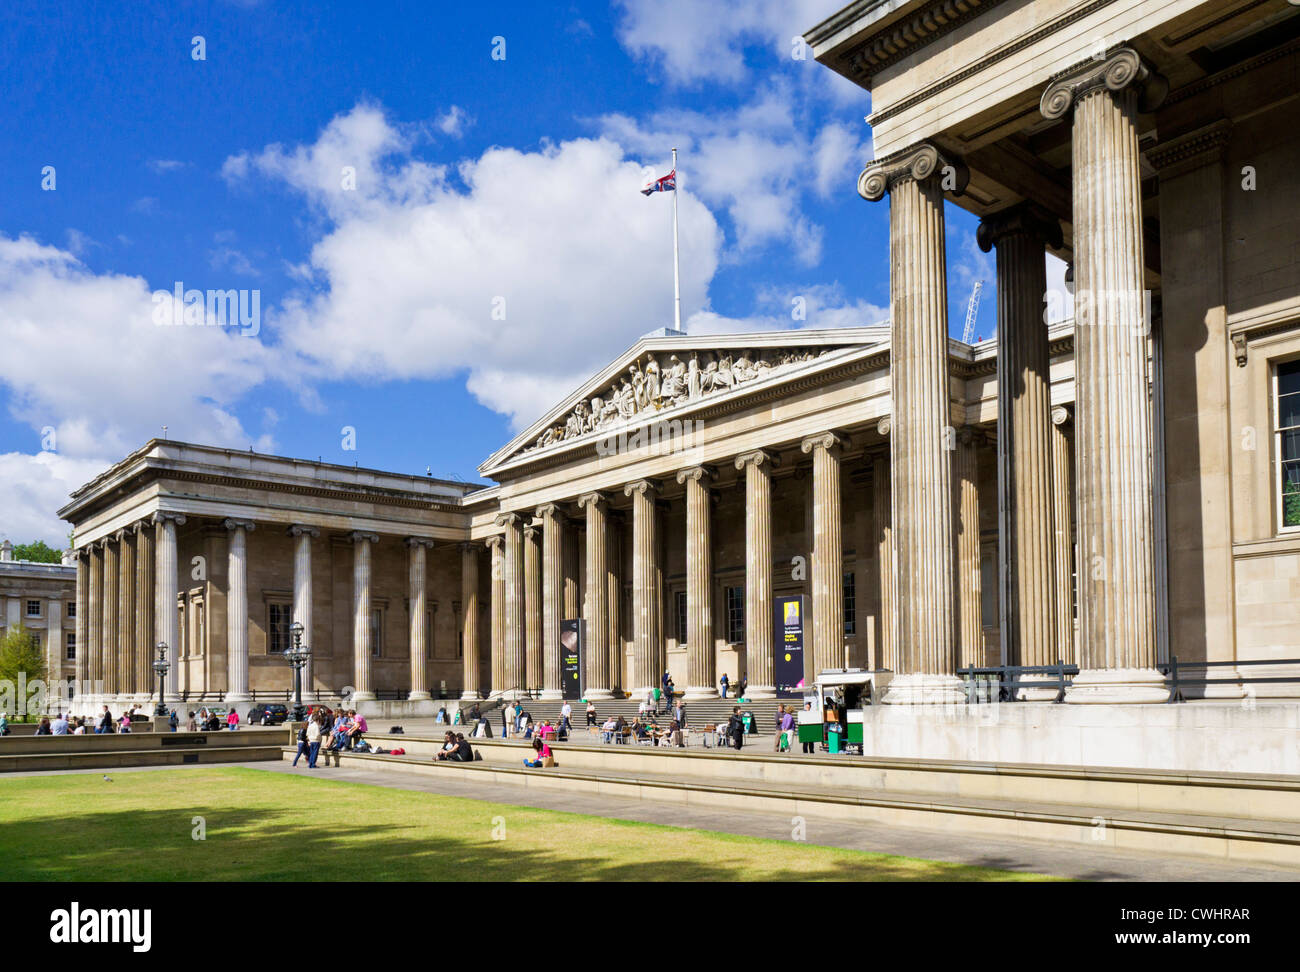 Le British Museum Great Russell Street London England GB UK EU Europe Banque D'Images